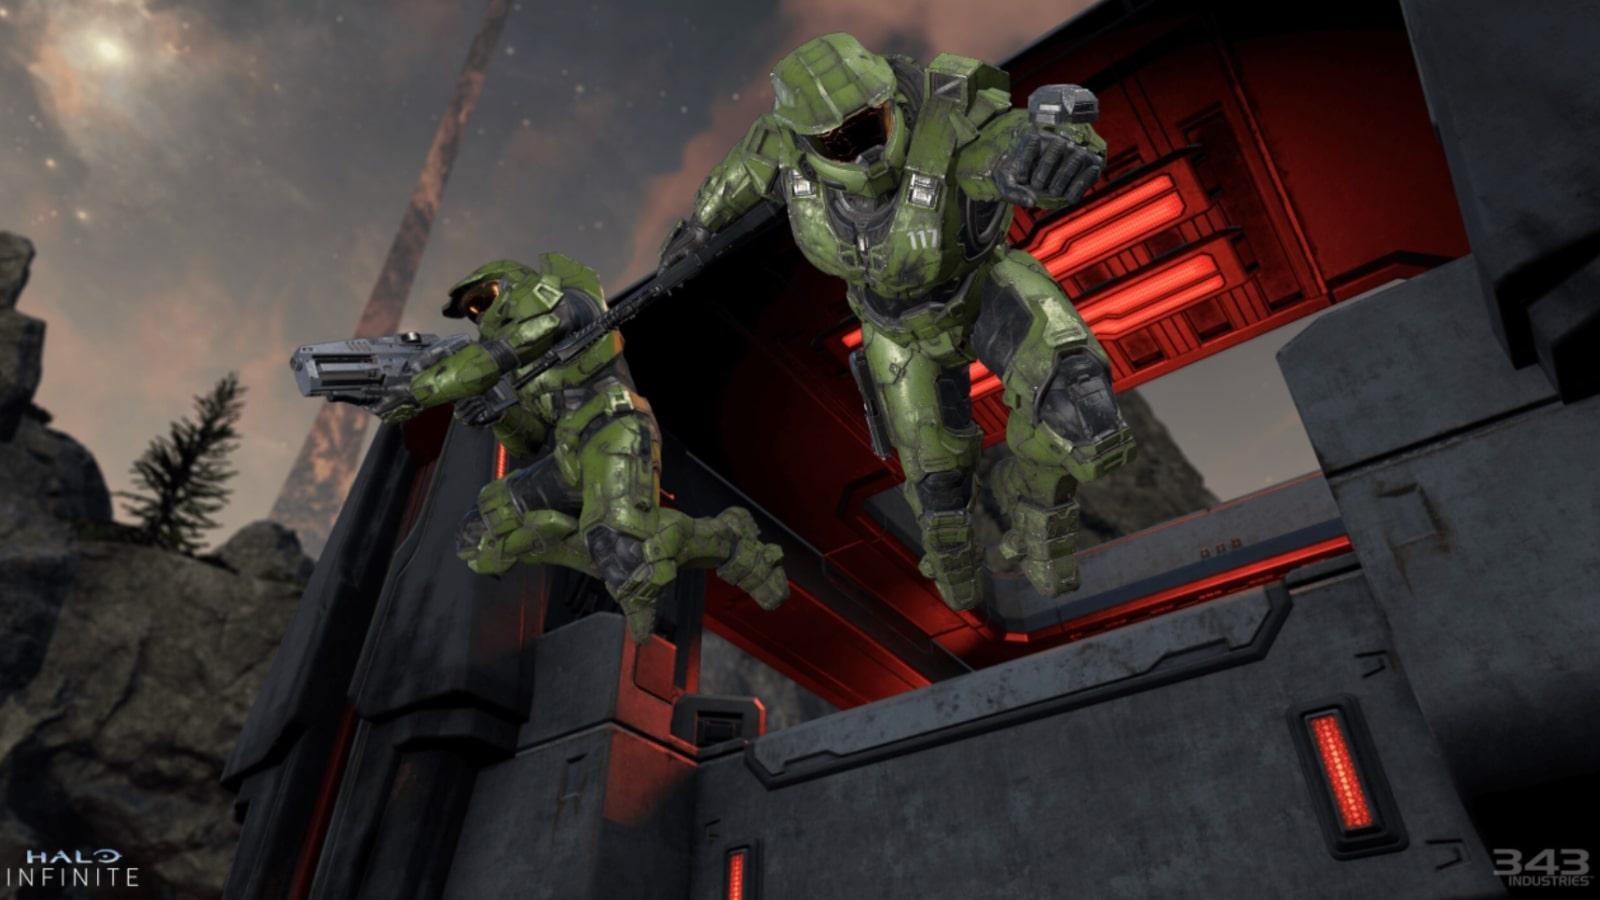 2 Master Chief's jumping off a building